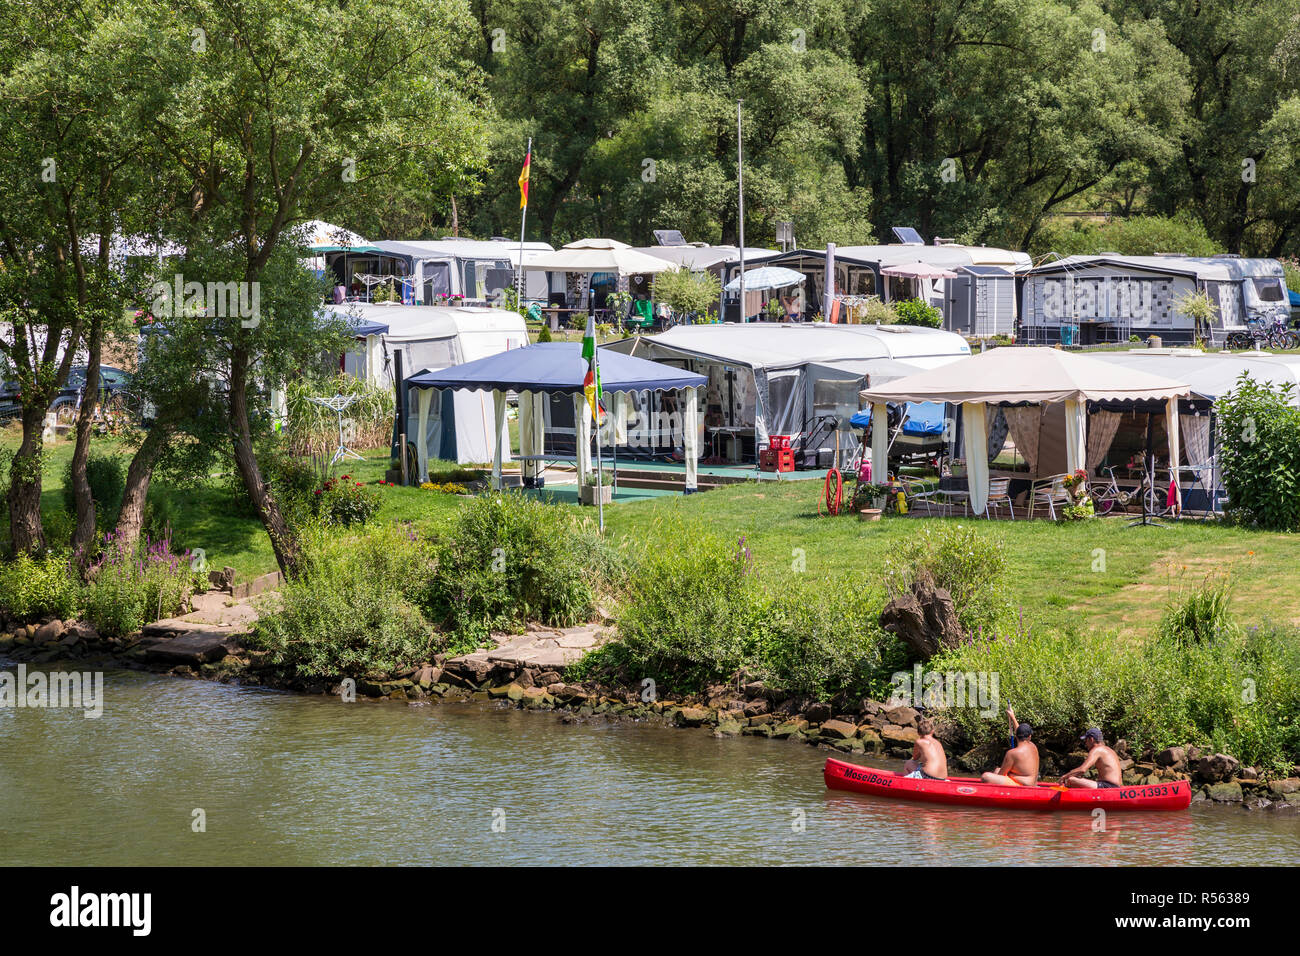 Burgen, Germany.  Campground along the Moselle. Stock Photo